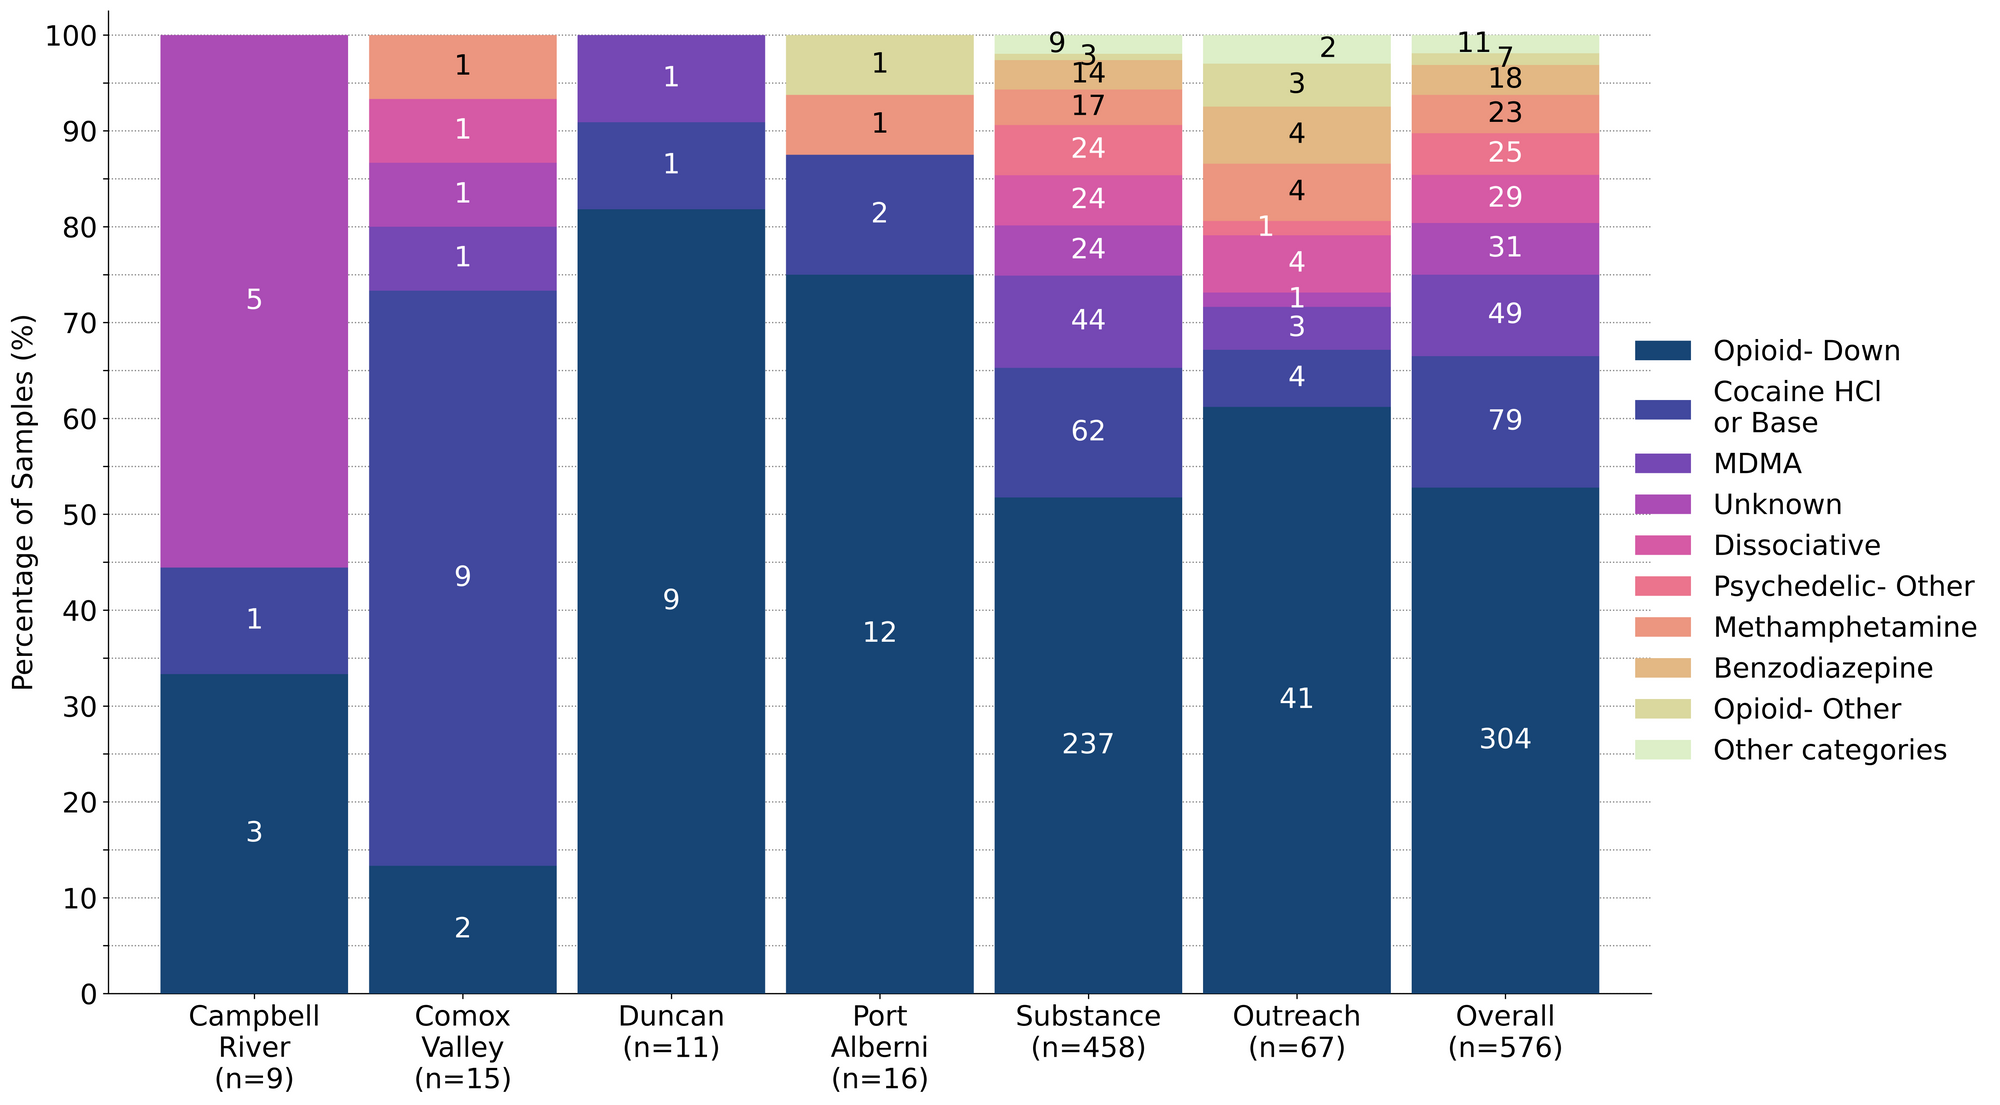 Figure 1. Prevalence of drug classes checked during November, split by sample collection/method. Bars are stacked by percentage of samples in each drug class, with the individual sample counts overlaid.